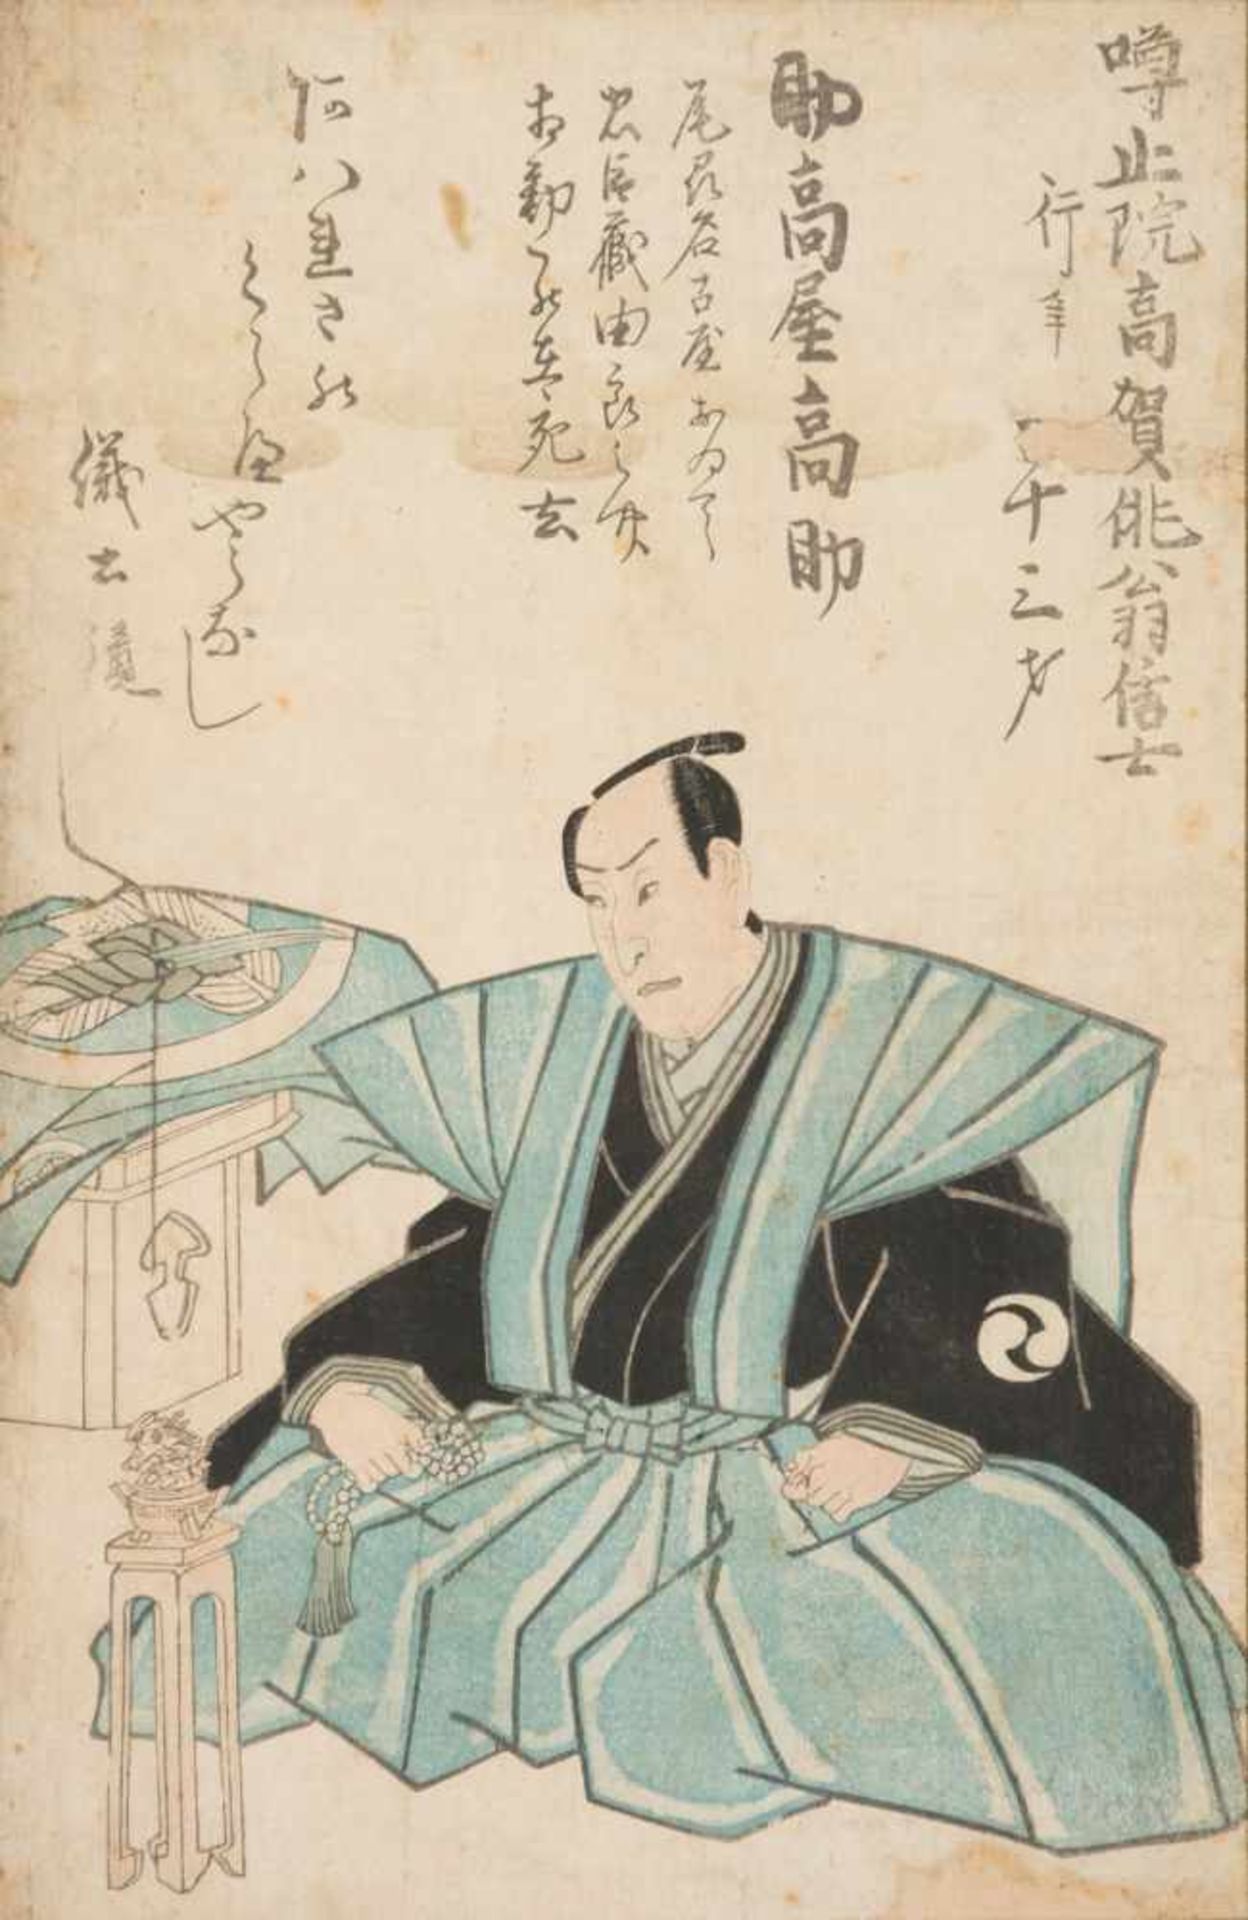 Ukiyo-e woodblock print. Japan. Edo Period (1603-1868).Signed with calligraphies. Depicting a s